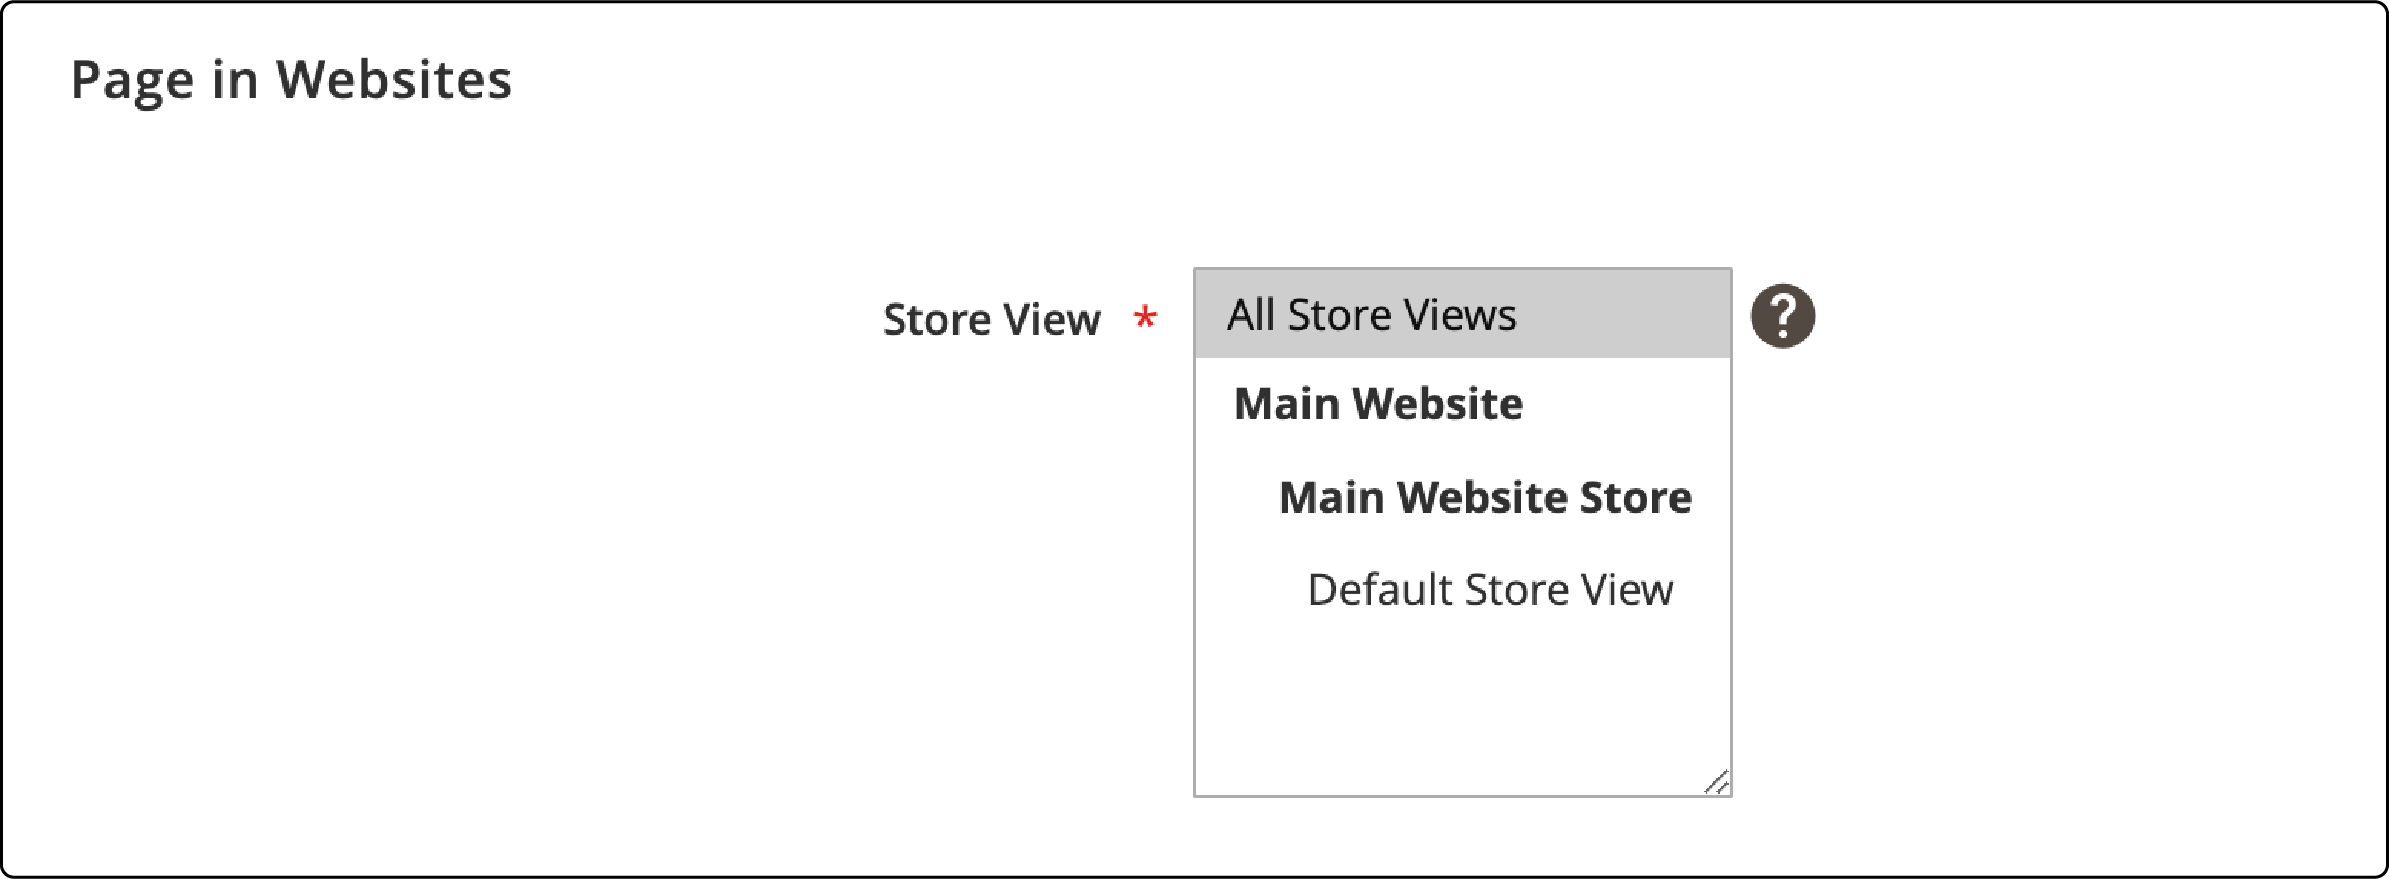 Setting the store view for Magento 2 featured products display